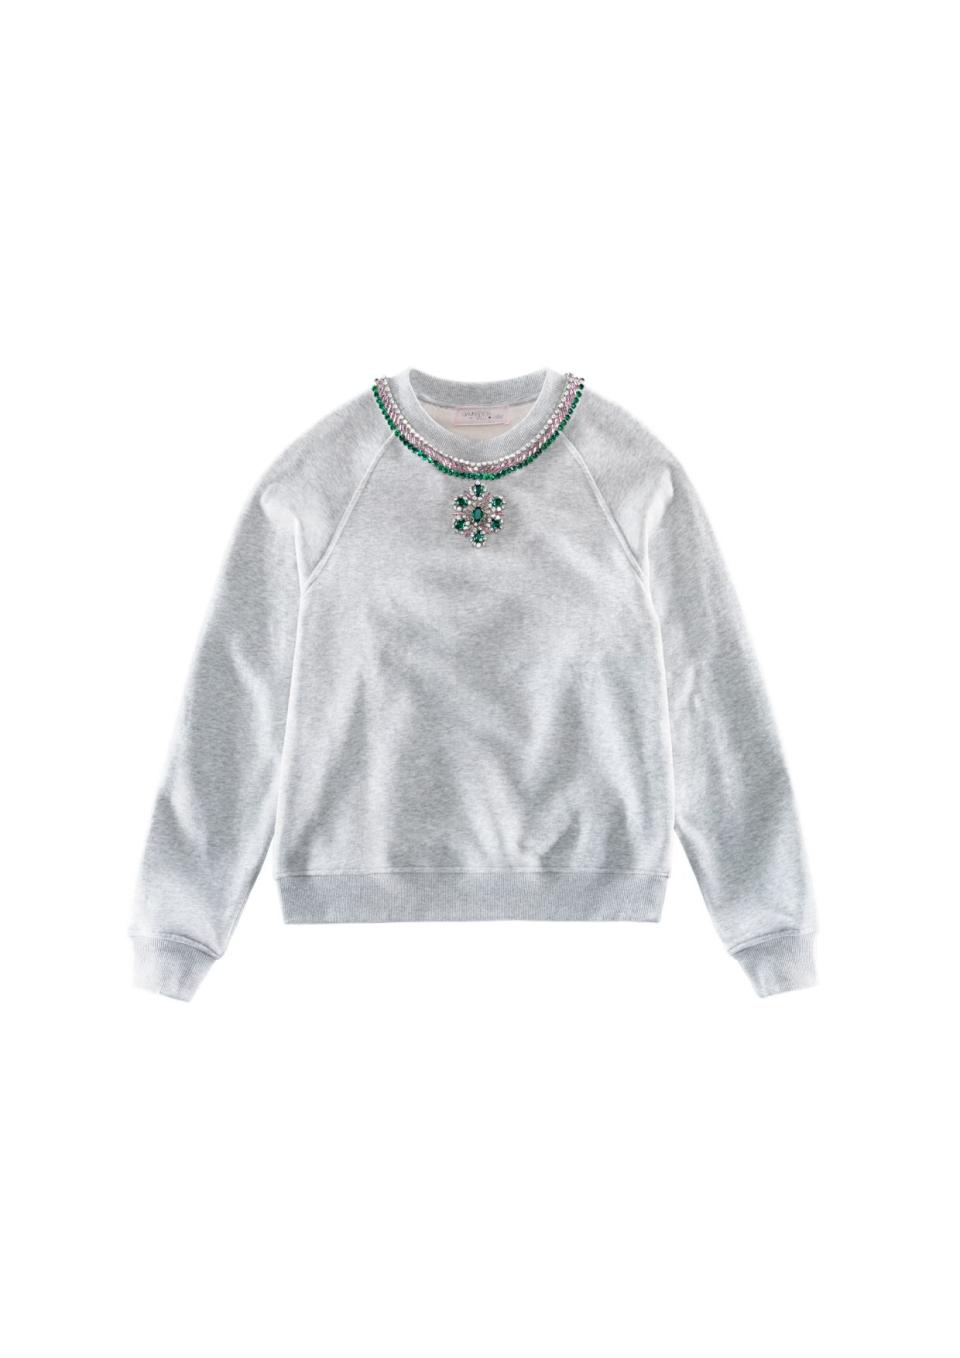 Crewneck embellished sweater in grey, $159. (PHOTO: H&M)